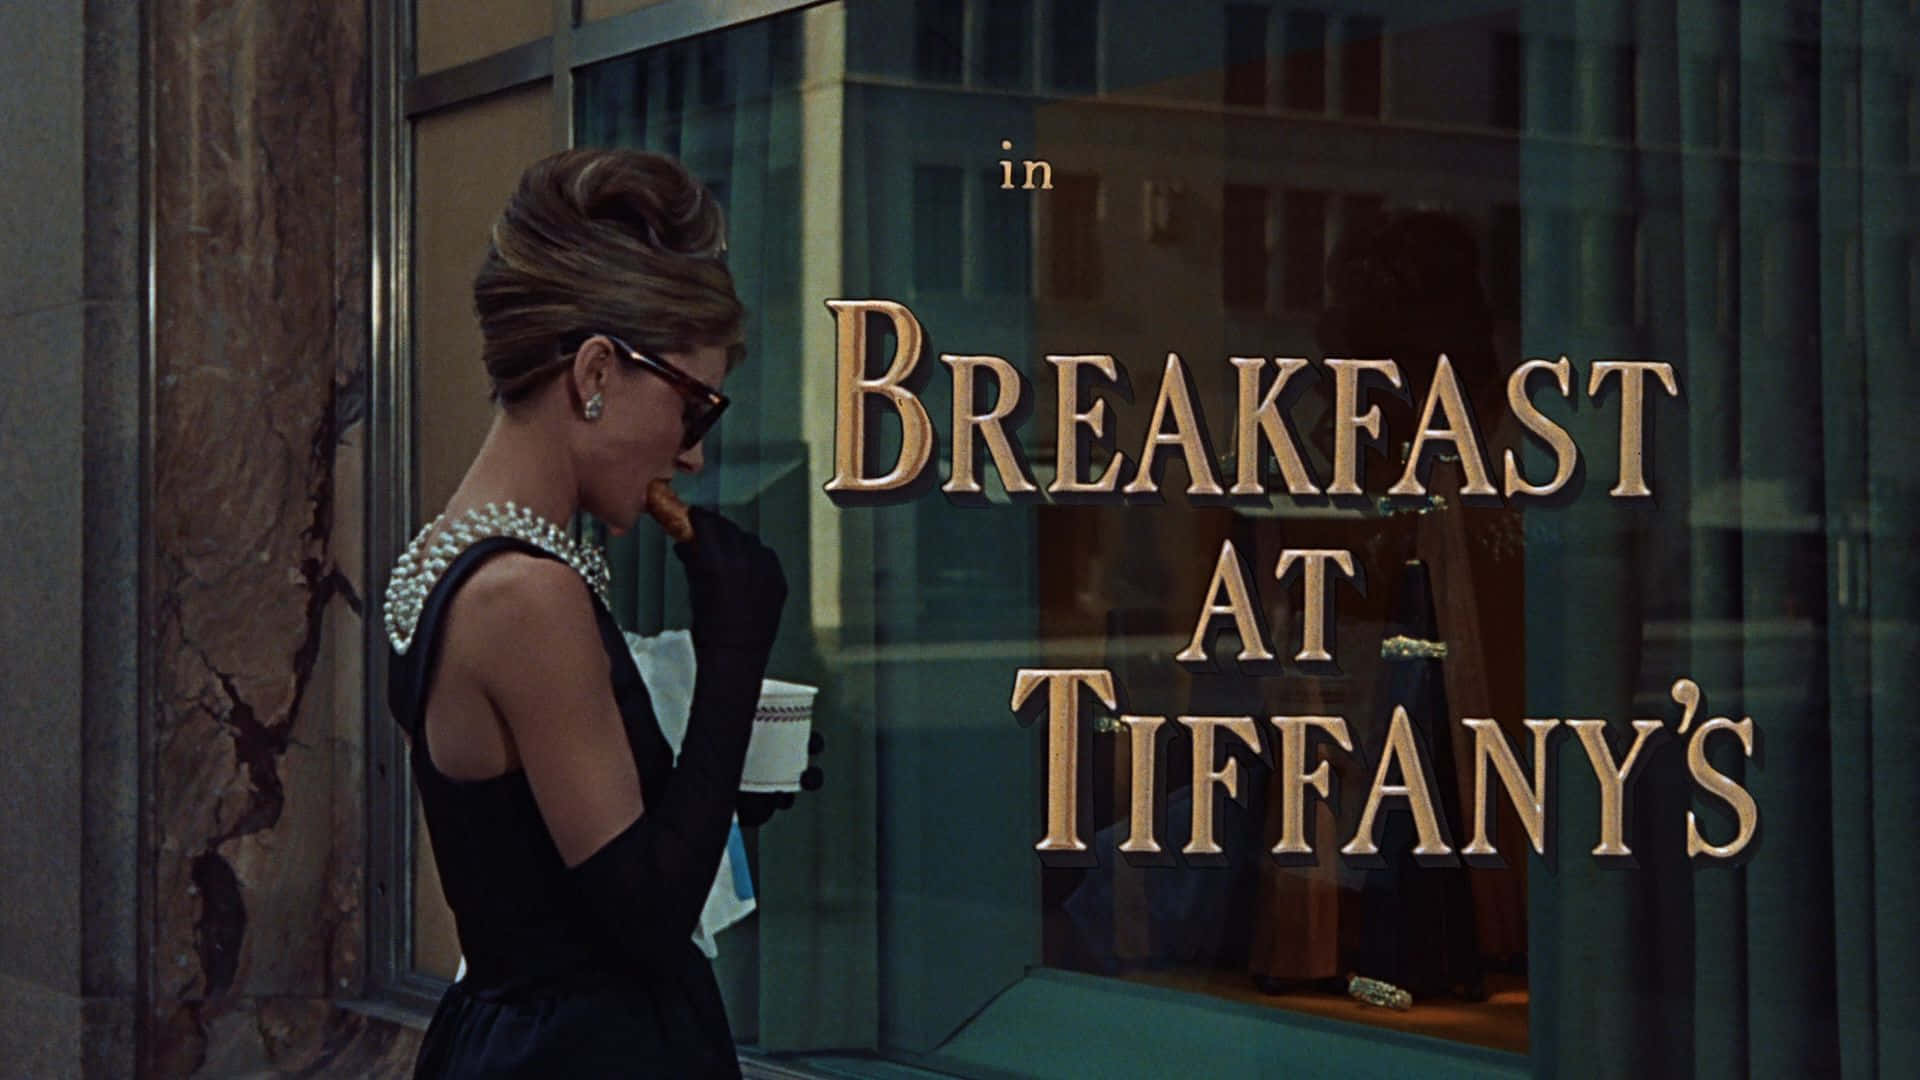 Audrey Hepburn outside of Tiffany's Jewelry looking beautiful in her signature style Wallpaper